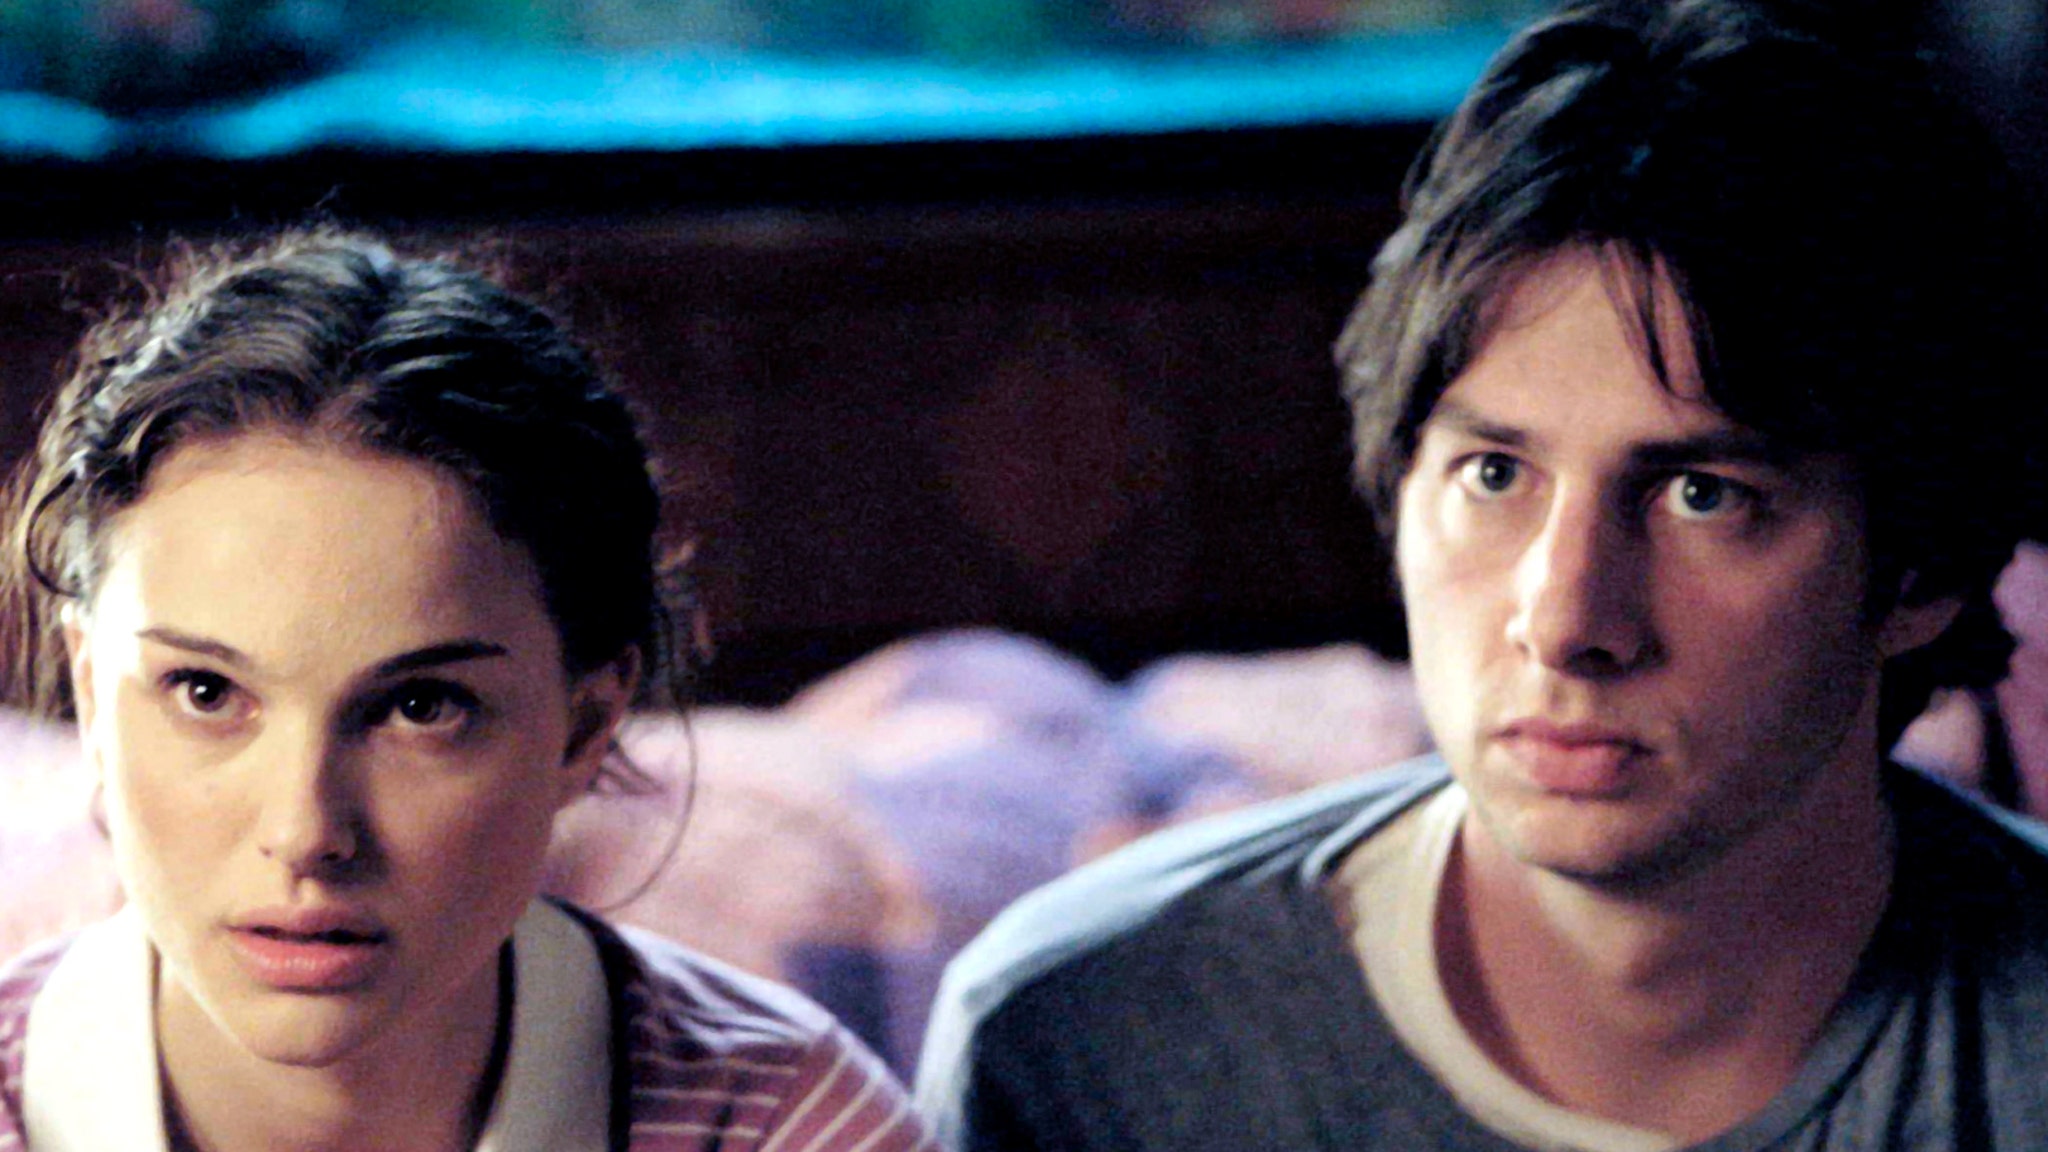 Zach Braff Reacts to Criticism of Garden State Nearly 20 Years After Film's Release